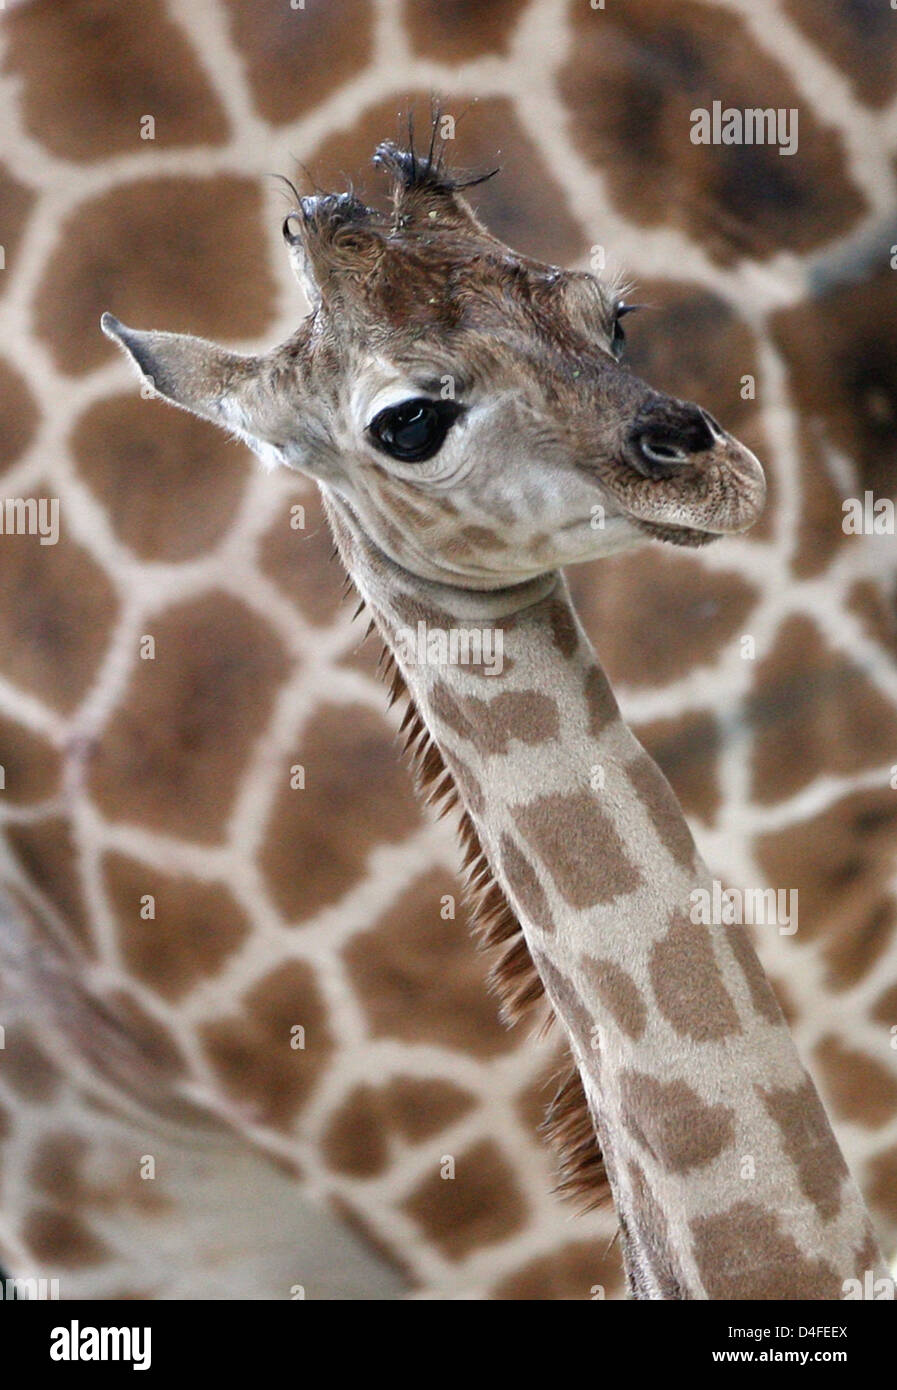 The Ugandan giraffe cub 'Ulla' is pictured with her mother 'Lotti' in the zoo in Berlin, Germany, 04 July 2008. The giraffe was born on 19 June 2008 in the zoo. Photo: KLAUS-DIETMAR GABBERT Stock Photo